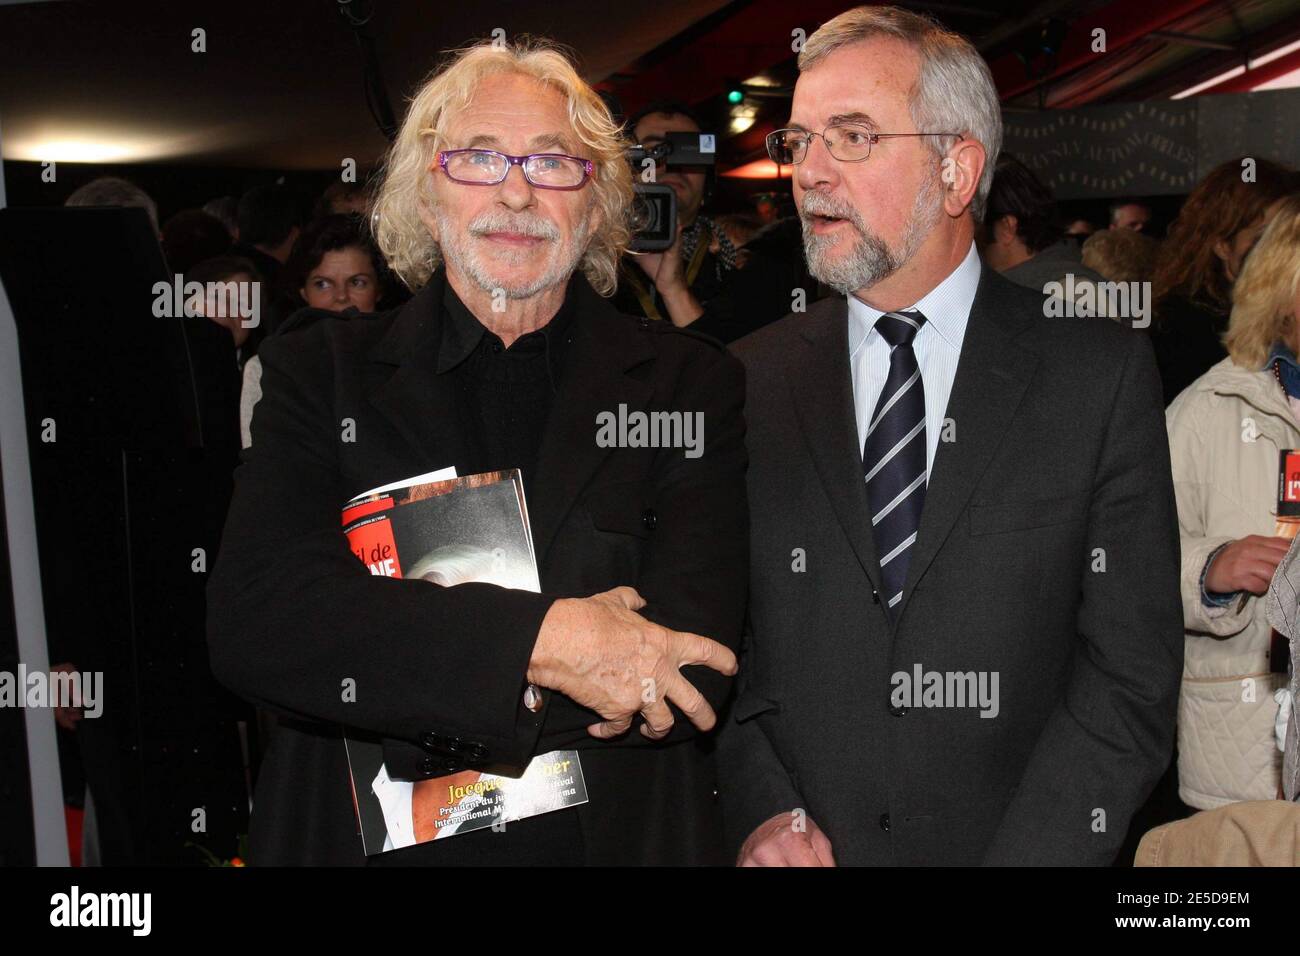 Pierre Richard and MP Jean-Marie Rolland attending the 9th Film Festival  Music and Cinema in Auxerre, France on November 13, 2008. Photo by Benoit  Pinguet/ABACAPRESS.COM Stock Photo - Alamy